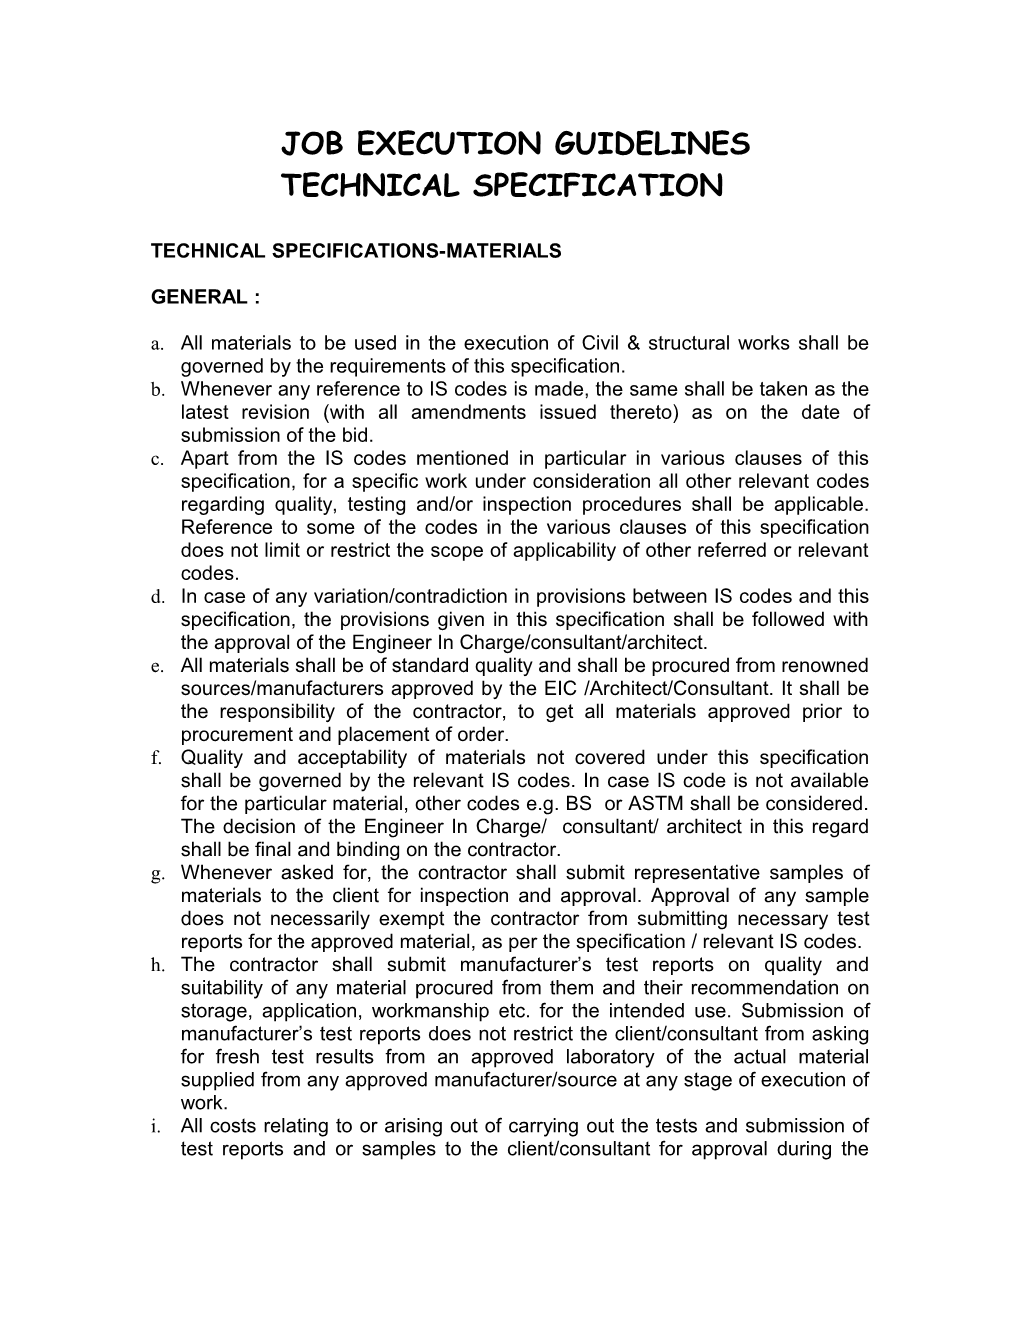 Job Execution Guidelines Technical Specification